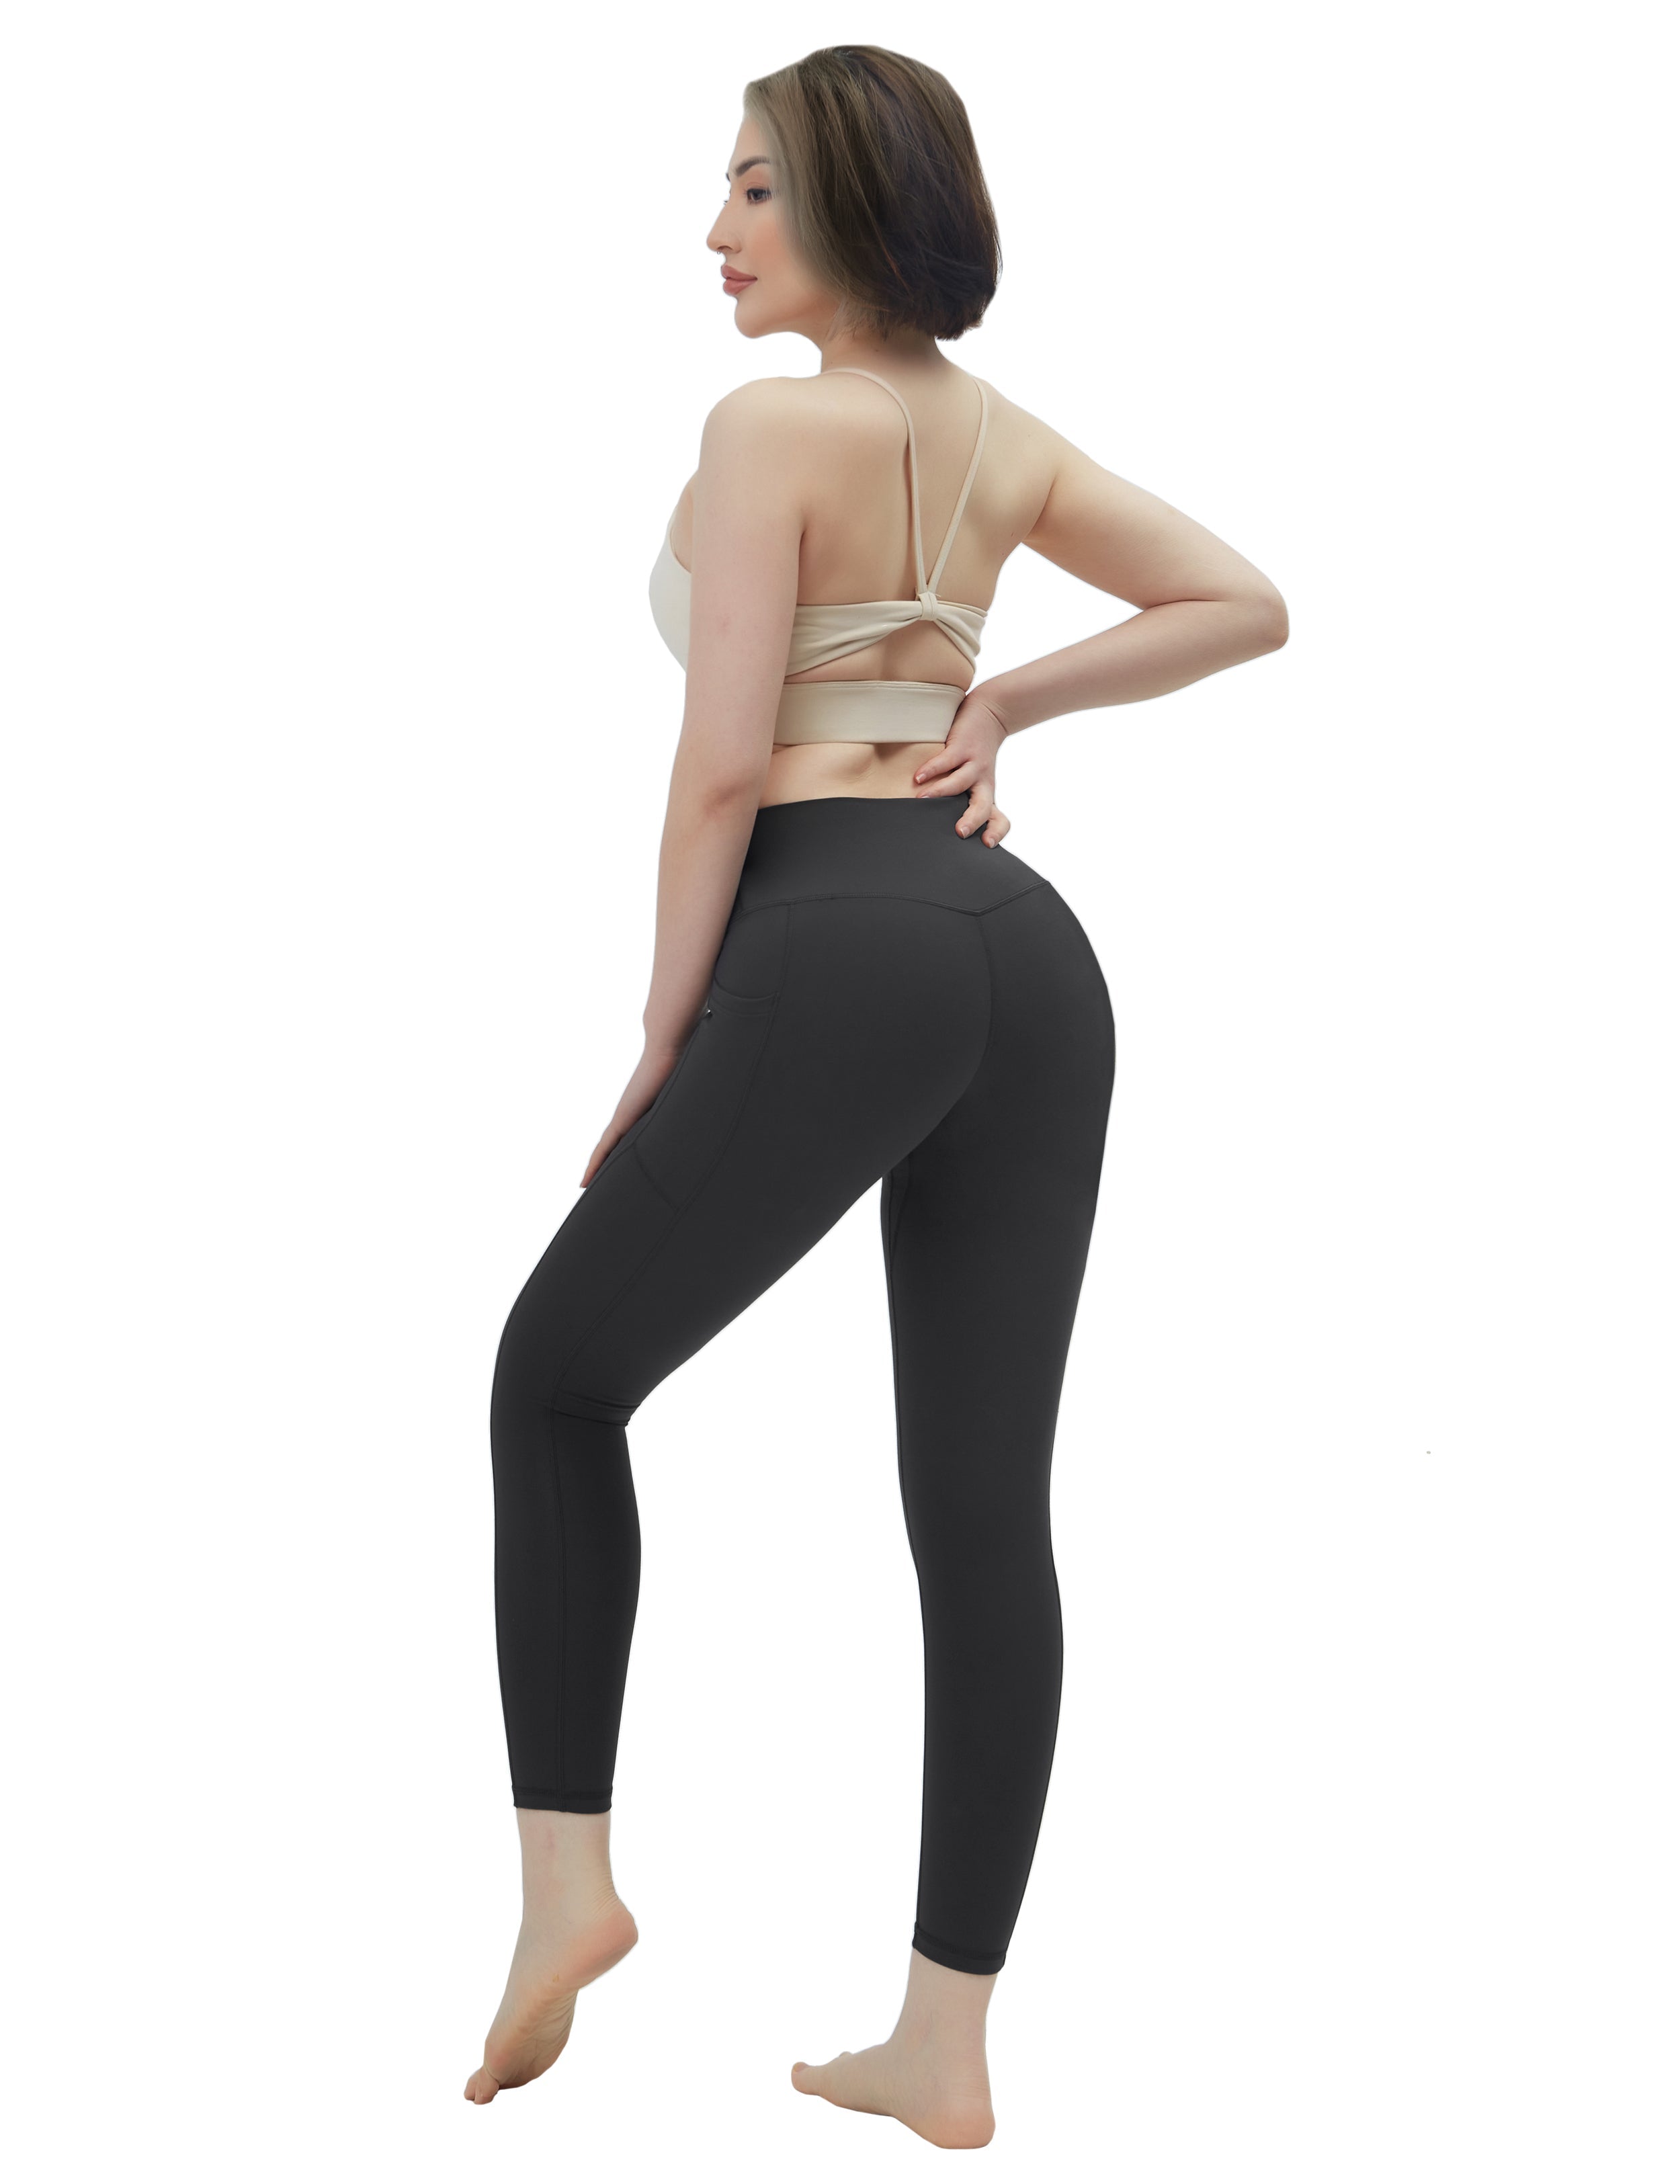 High Waisted Plus Size Pants 7/8 Length Leggings with Pockets charcoalgrey_Plus Size